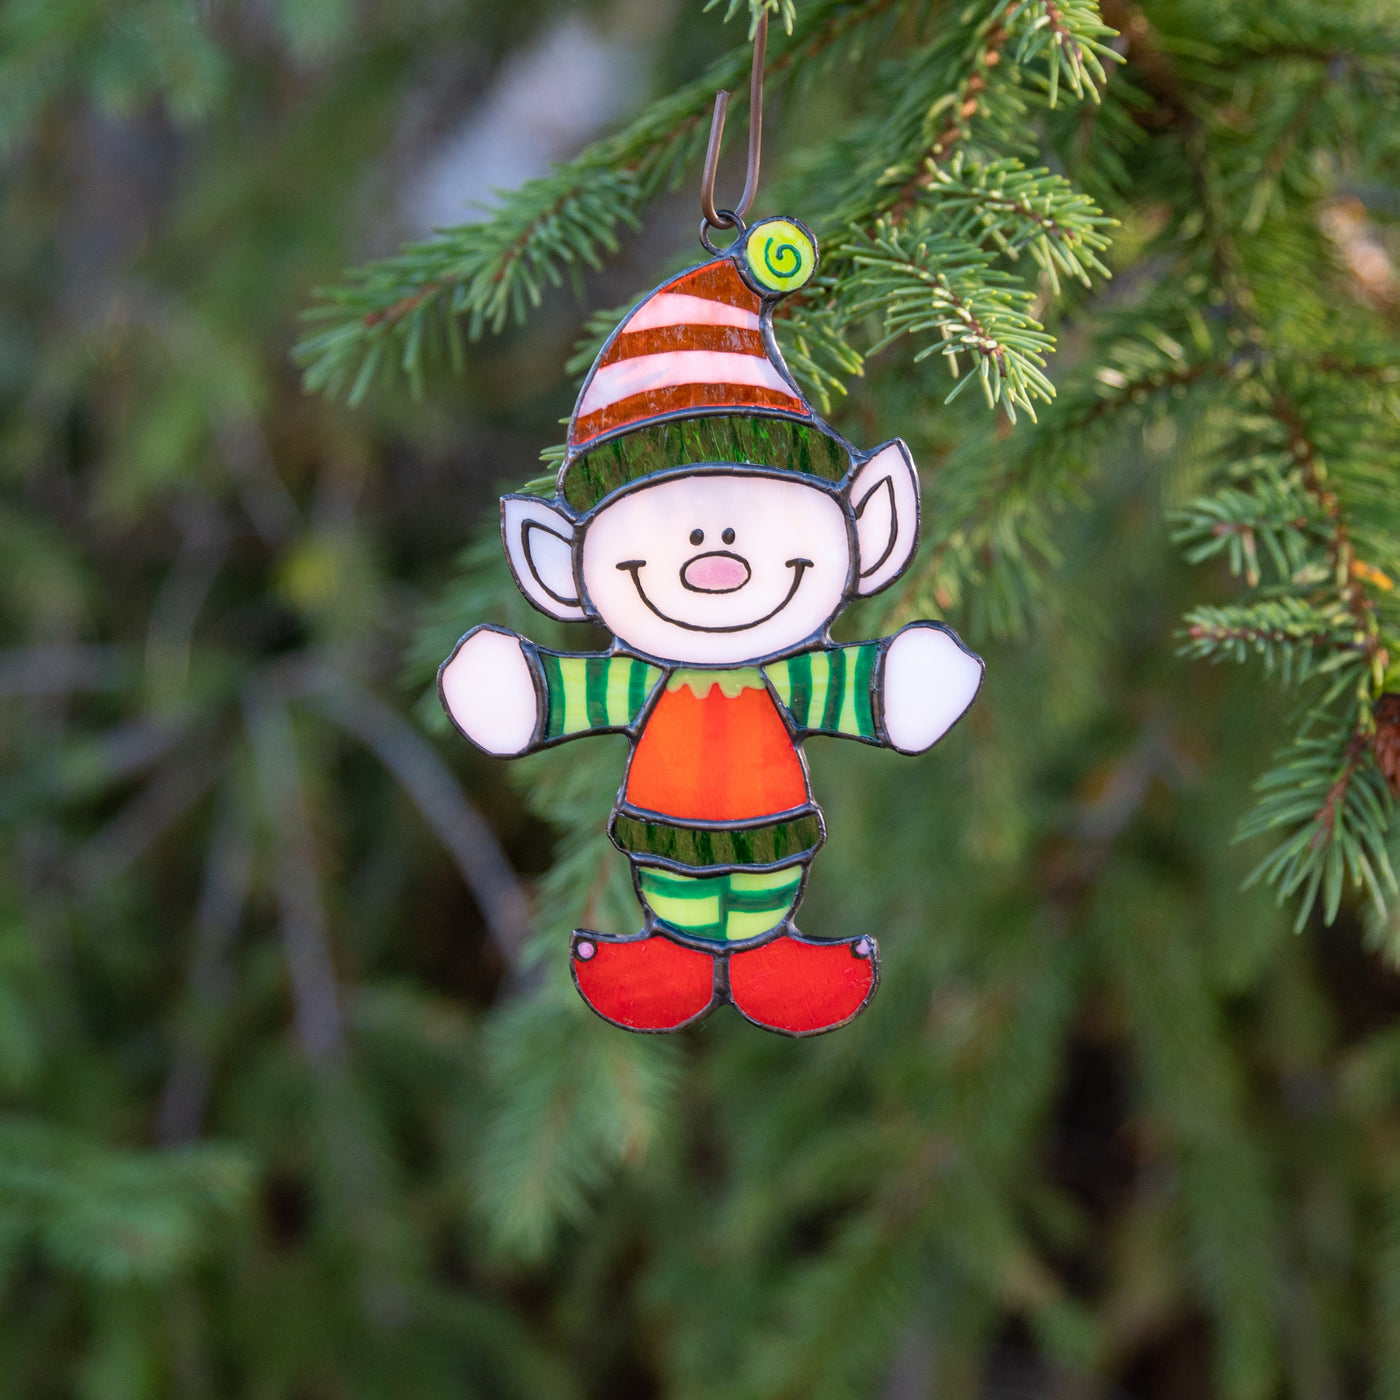 Stained glass Santa's Elf as a New Year Tree decoration